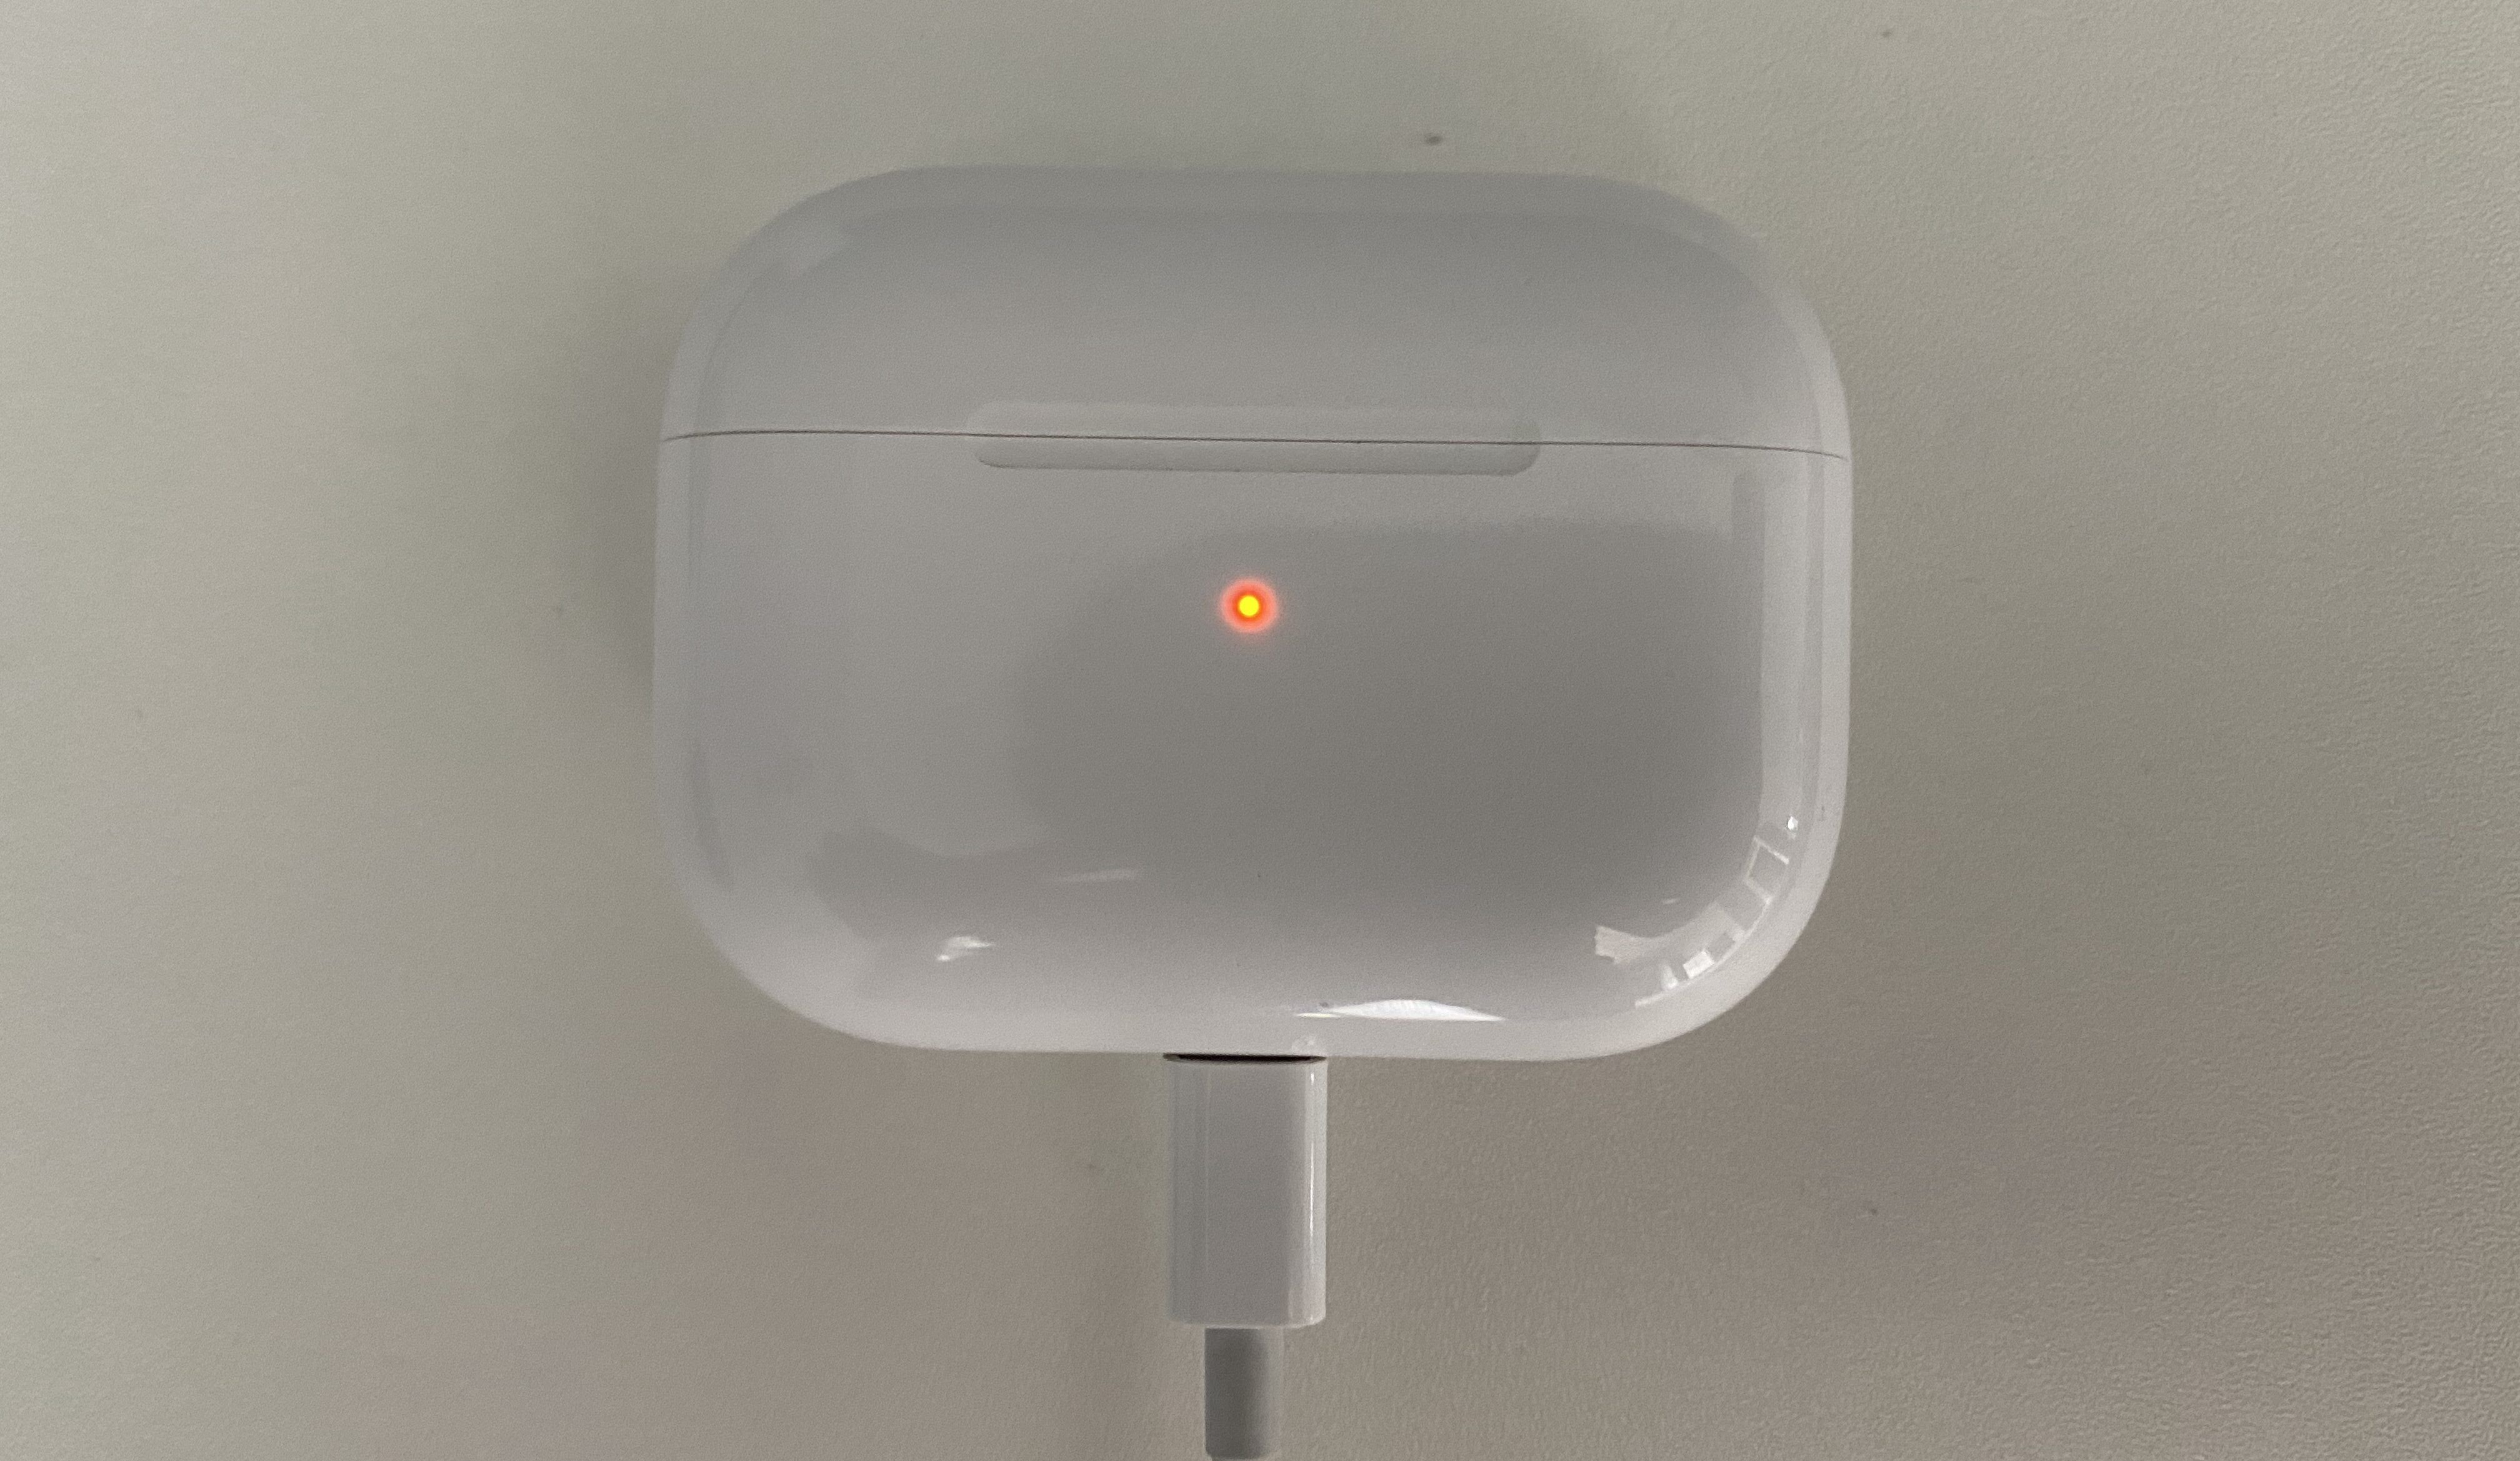 How To Charge Your AirPods Pro Or AirPods